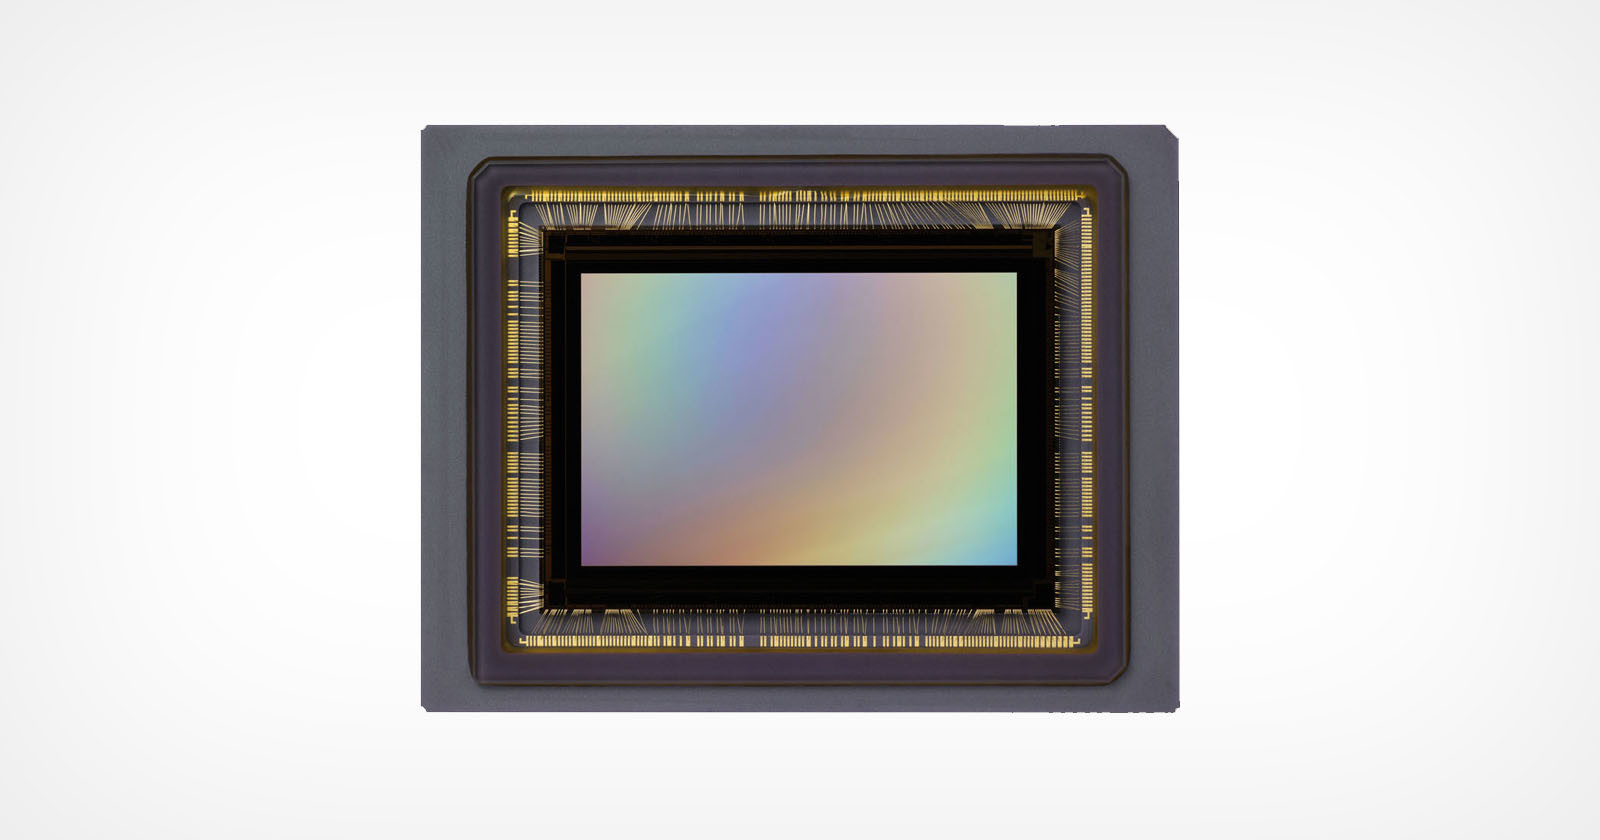 Sigmas Full-Frame Foveon Sensor Will Be Ready By the End of 2022